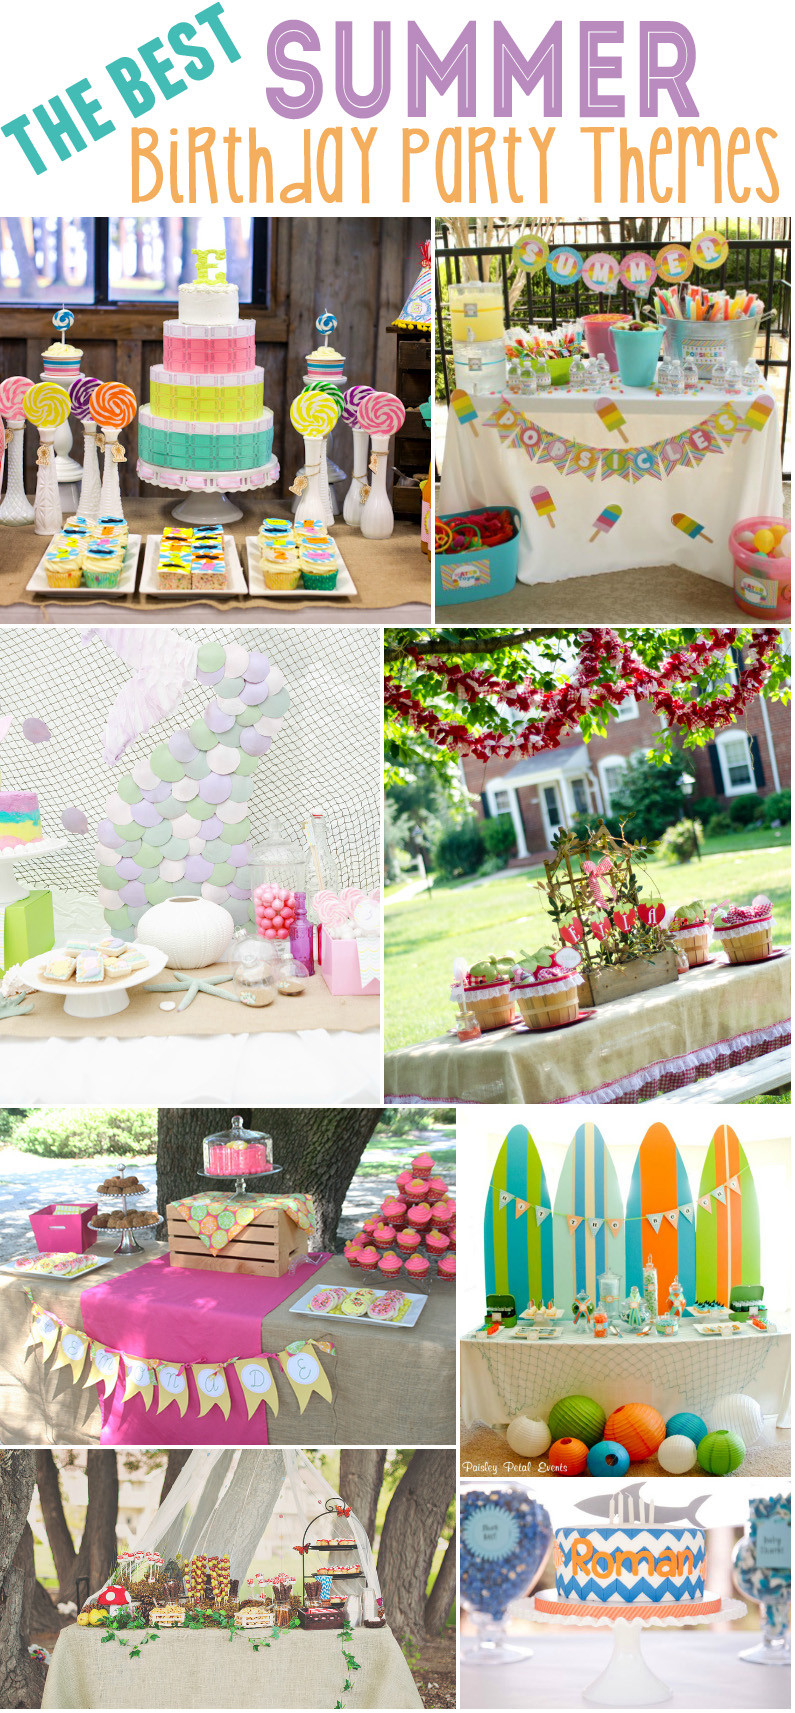 Summer Theme Party Ideas
 15 Best Summer Birthday Party Themes Design Dazzle